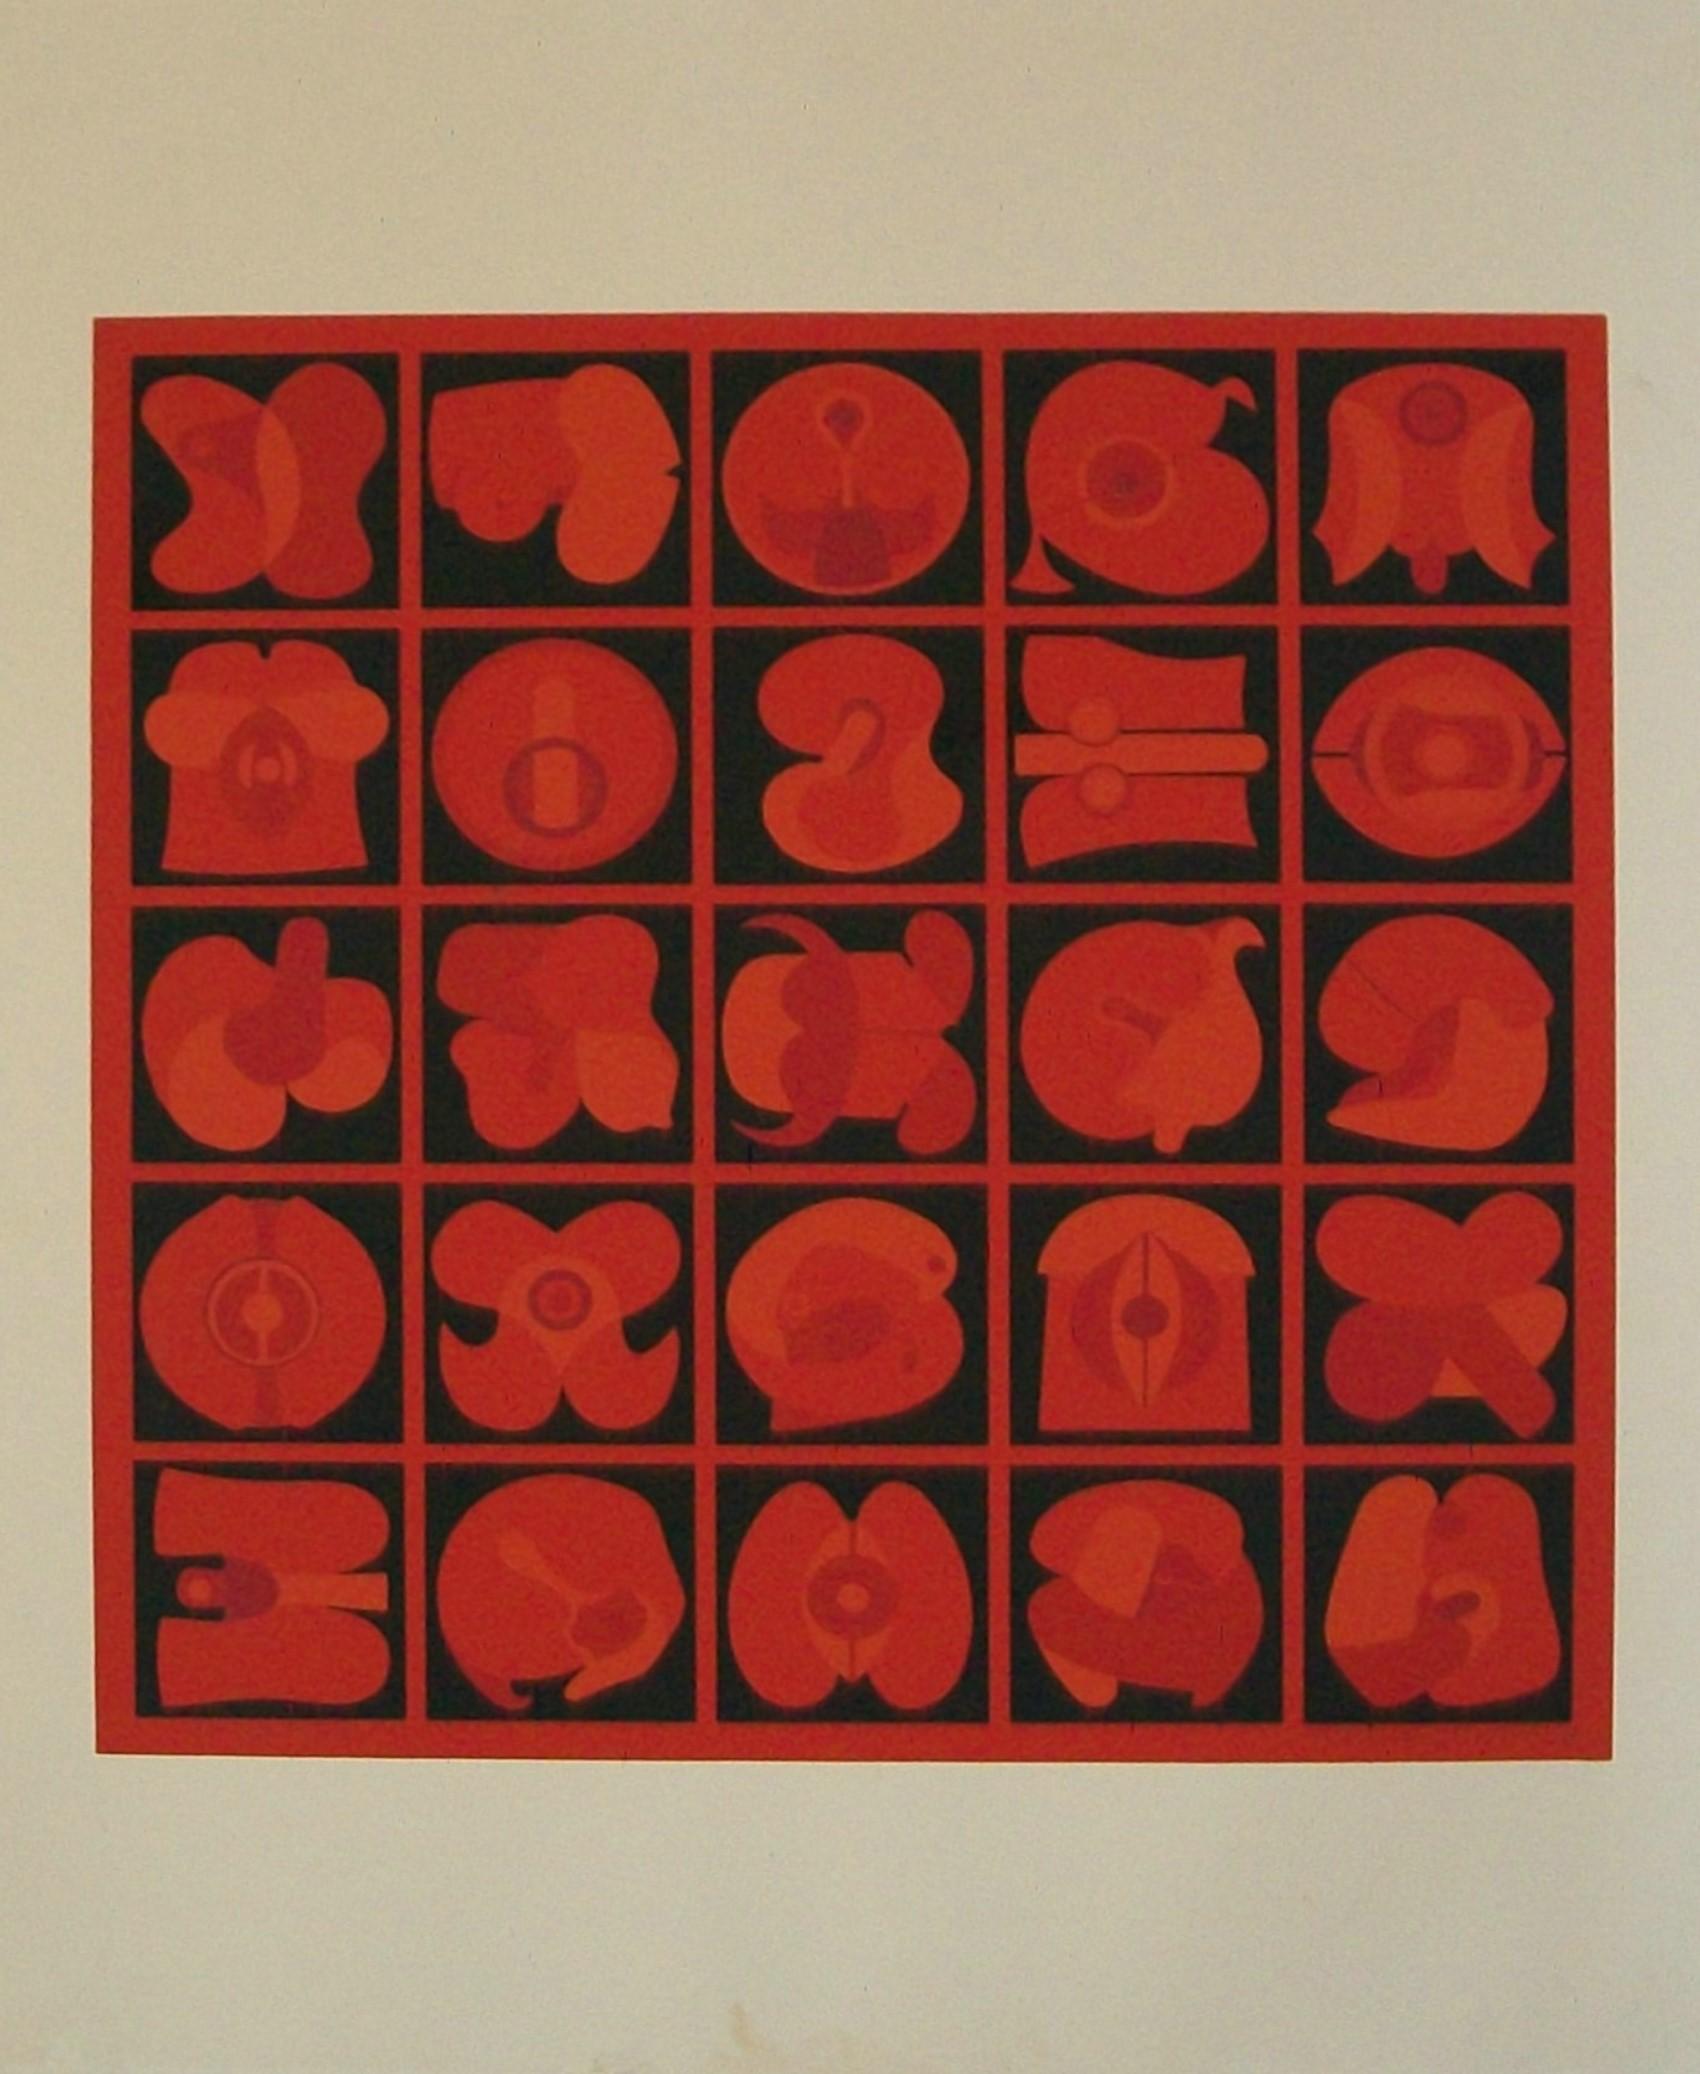 TAKESHI KAWASHIMA (Japanese/American b. 1930) - Untitled No. 68 - 75/80 - Mid Century original lithograph on paper - featuring a gridded pattern with semi abstract shapes - unframed - signed in pencil by the artist lower right and numbered lower